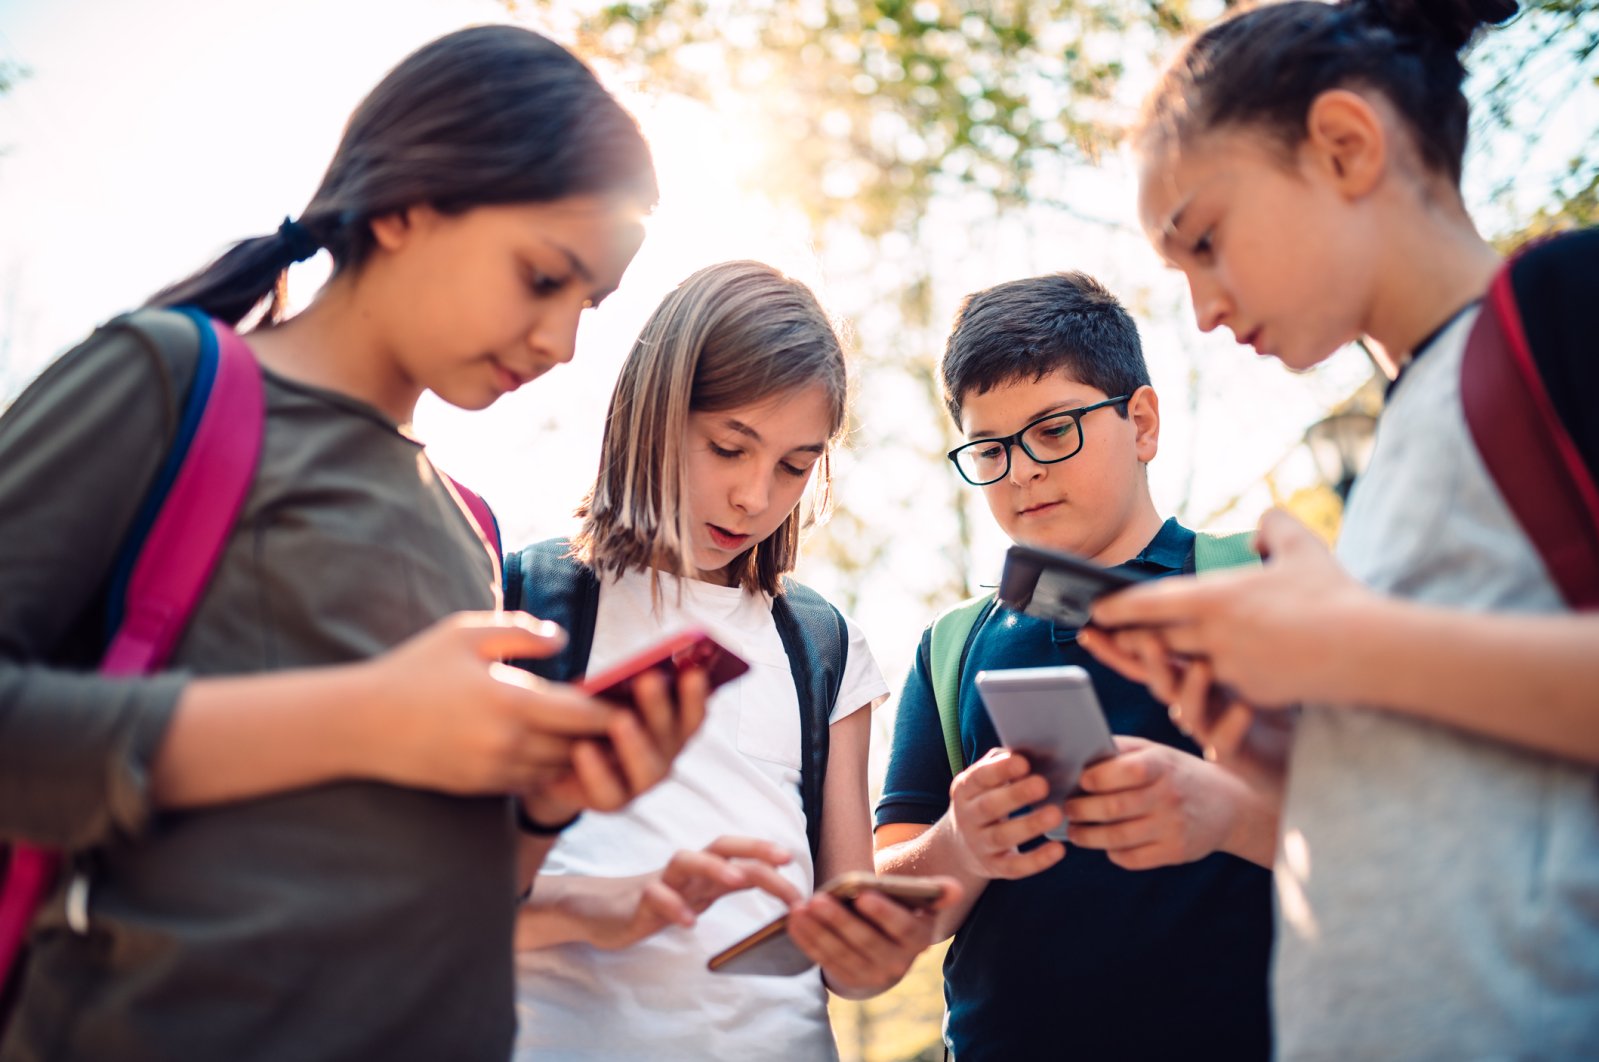 Statistics show that the average child gets their first smartphone at age 10 and has at least one social media account by age 11-12. (iStock Photo)